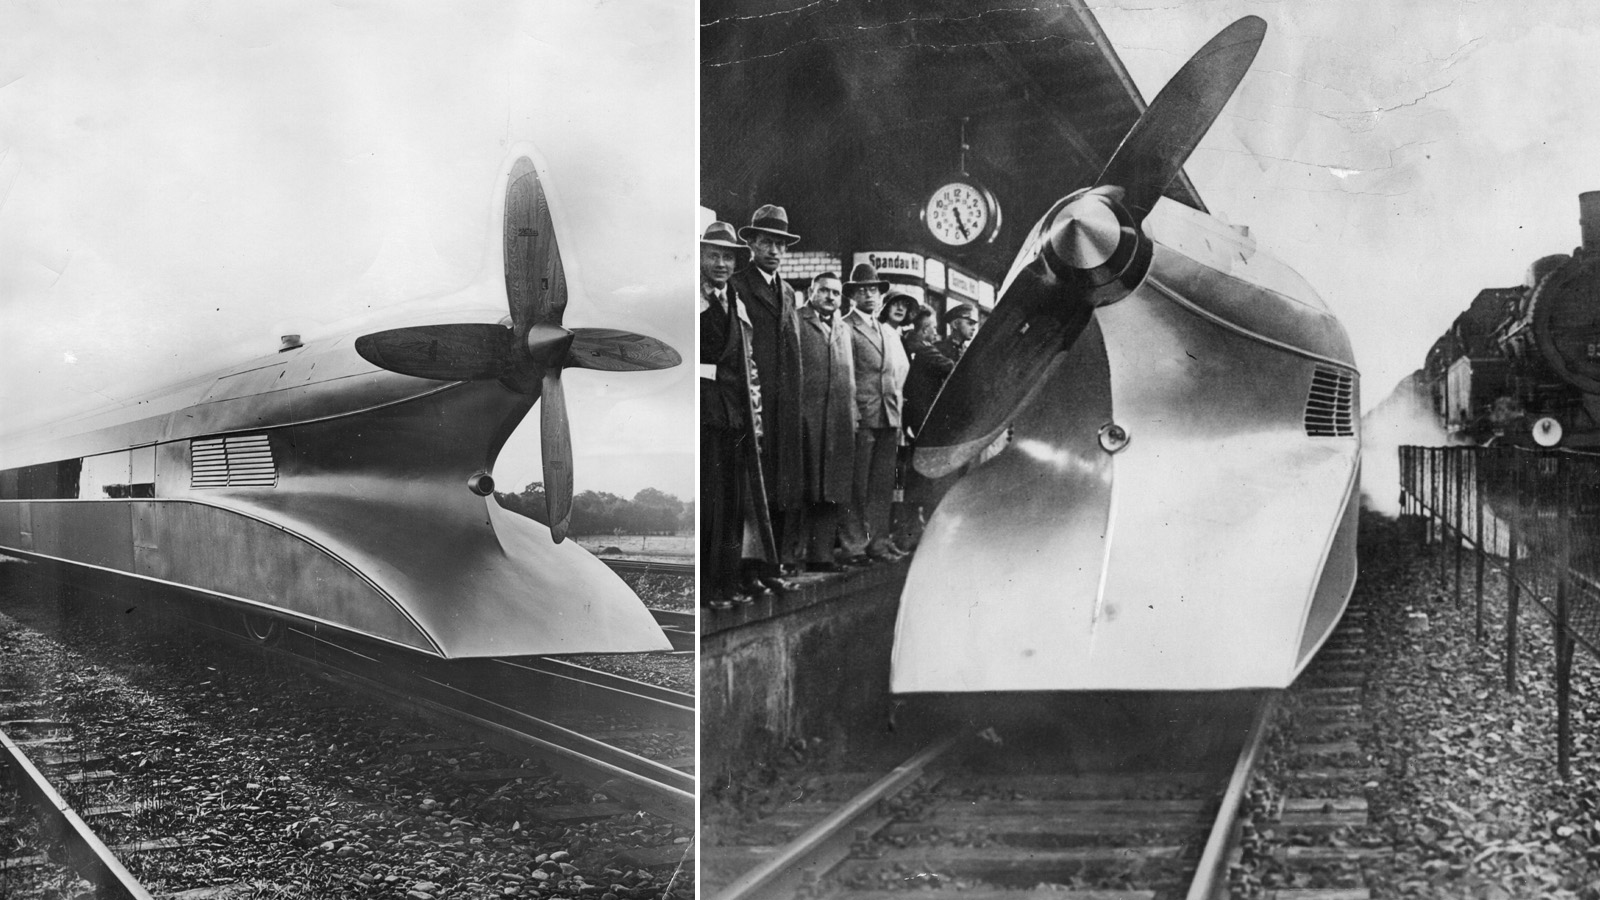 The Dodos We Made: 26 Propeller-Driven Machines That Cannot Fly